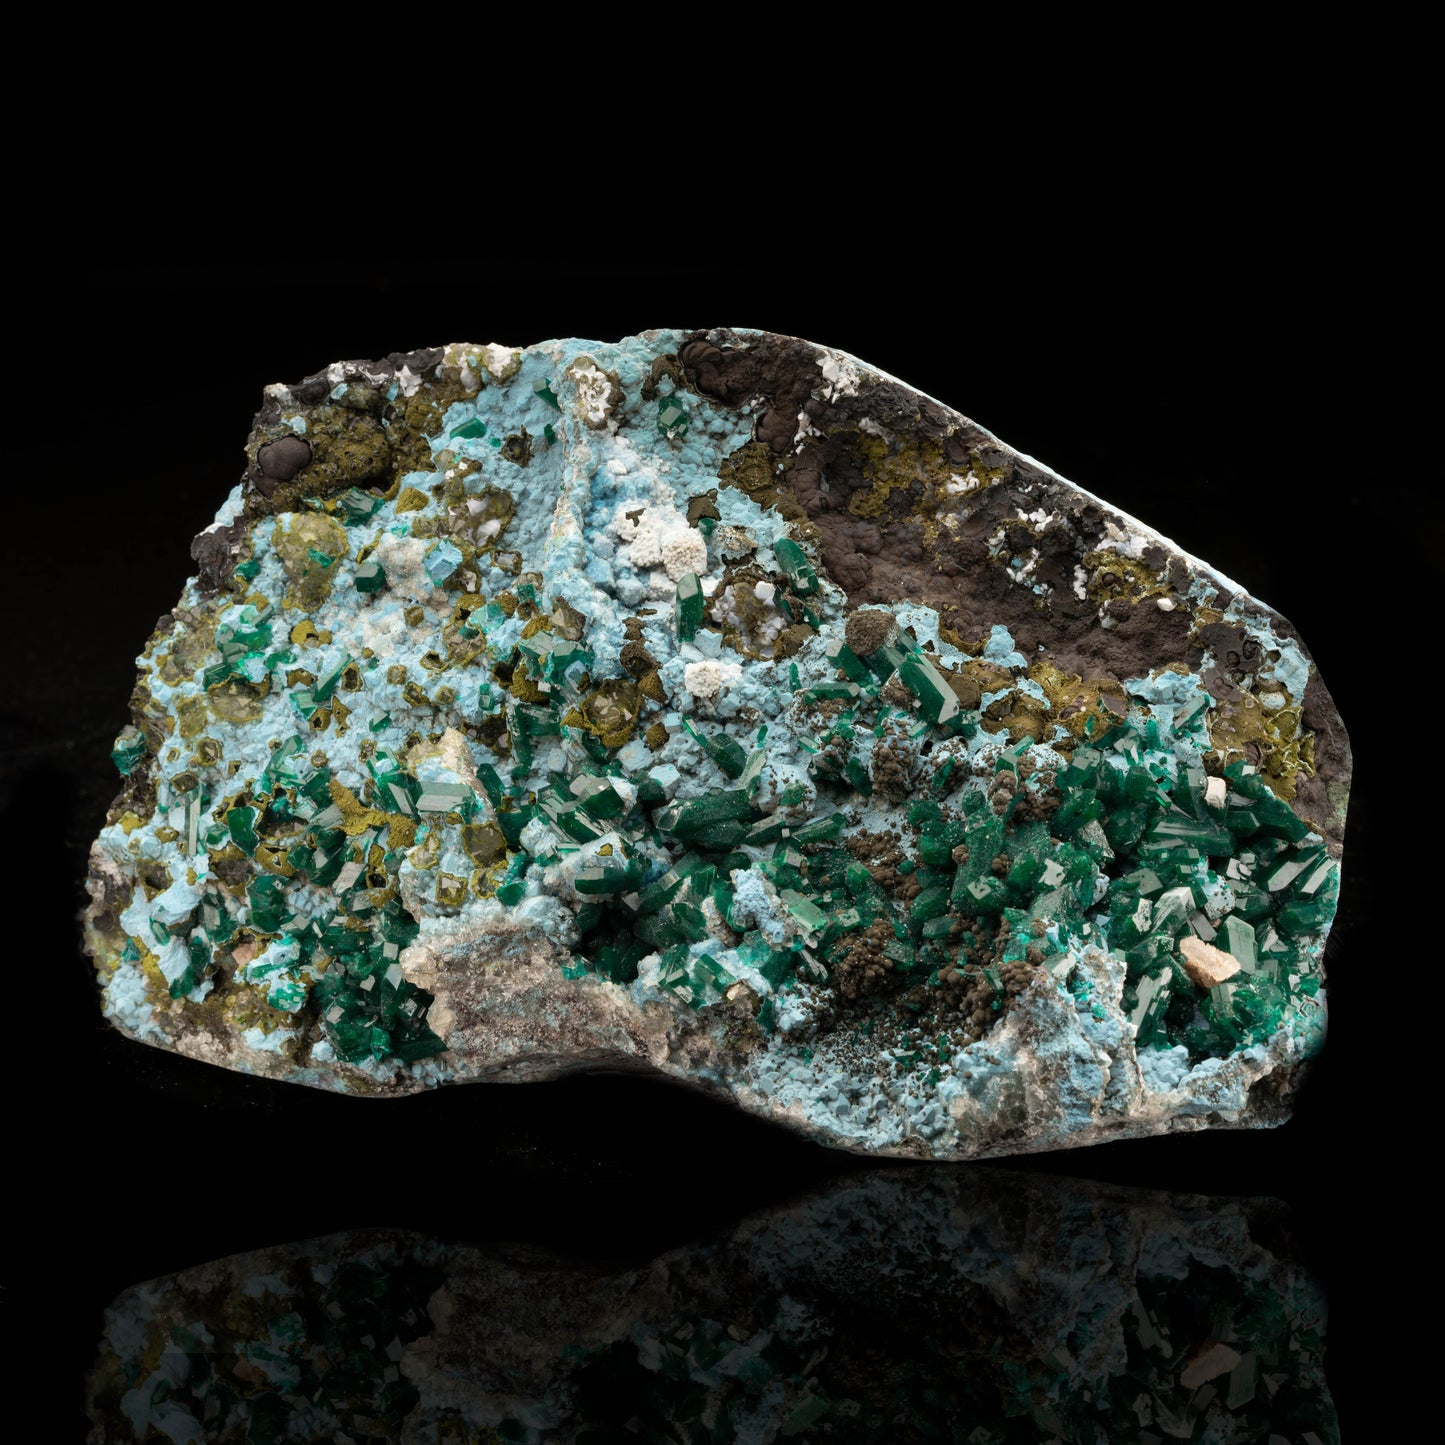 Dioptase And Mimetite on Plancheite // 6.5 Lb.